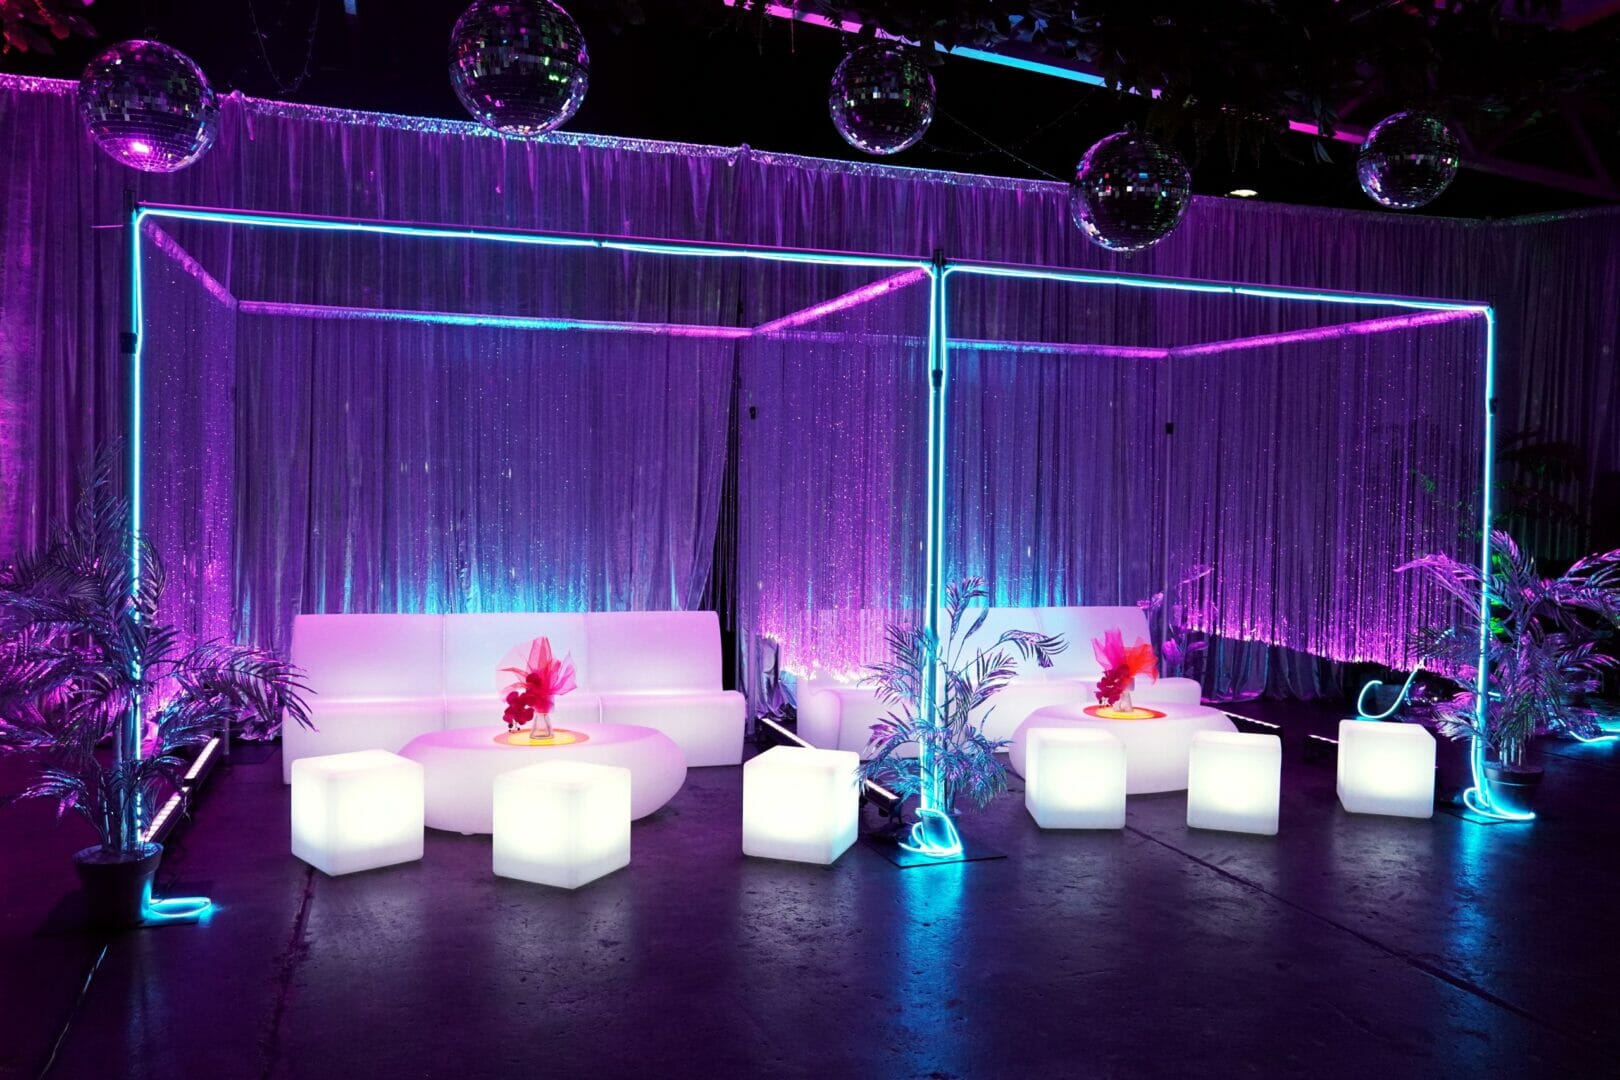 illuminated sofas, cubes, and coffee tables with beaded curtains, silver drape, neon lights and mirror balls